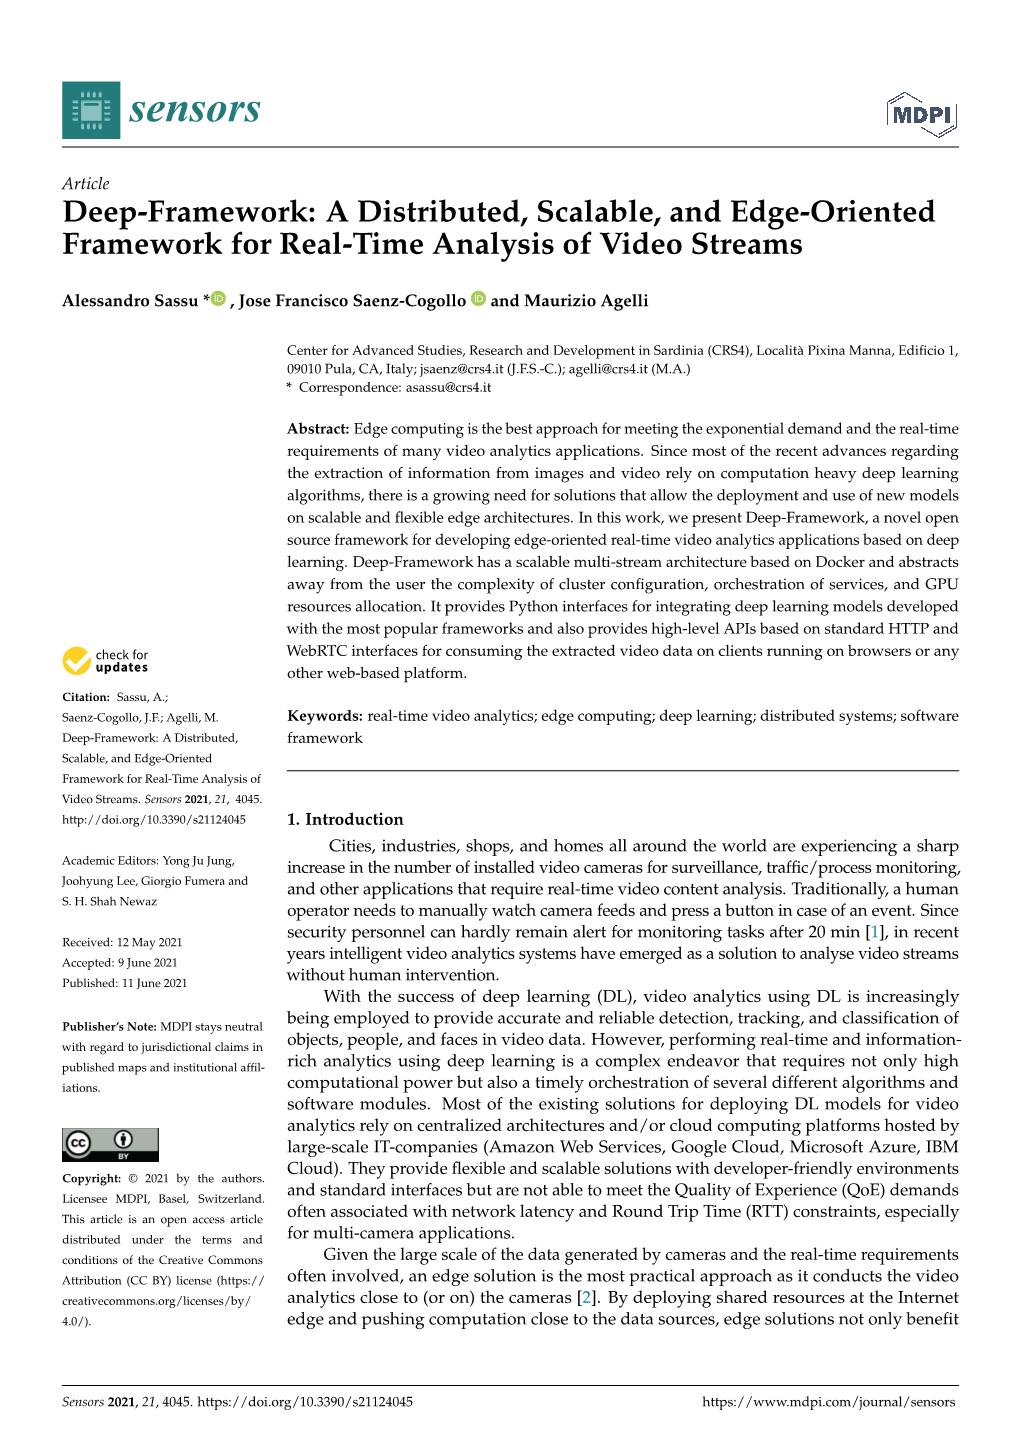 Deep-Framework: a Distributed, Scalable, and Edge-Oriented Framework for Real-Time Analysis of Video Streams